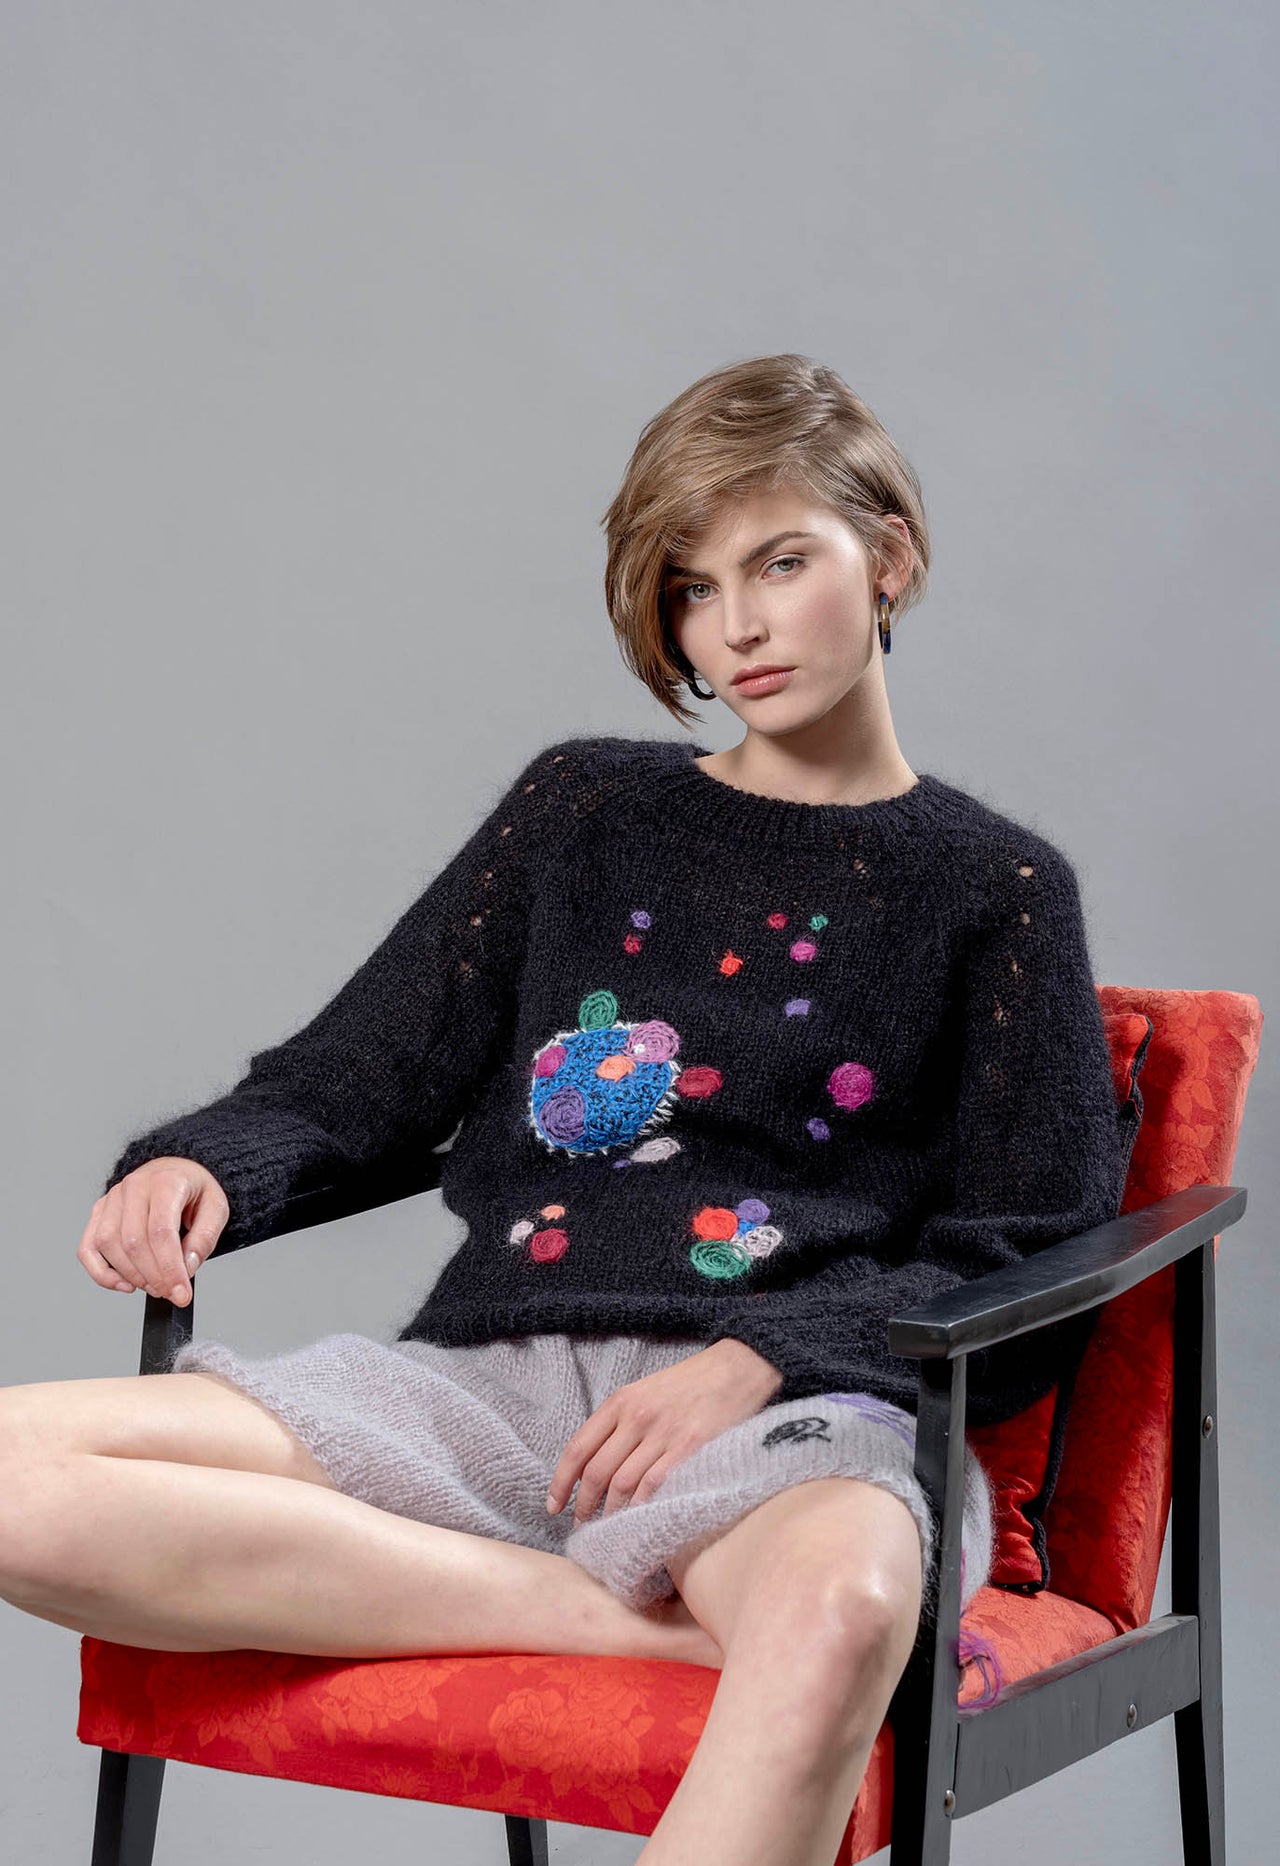 Woman sitting on red chair wearing black mohair sweater and grey mohair shorts. The sweater has colourful abstract star-like embroideries adorning it. 